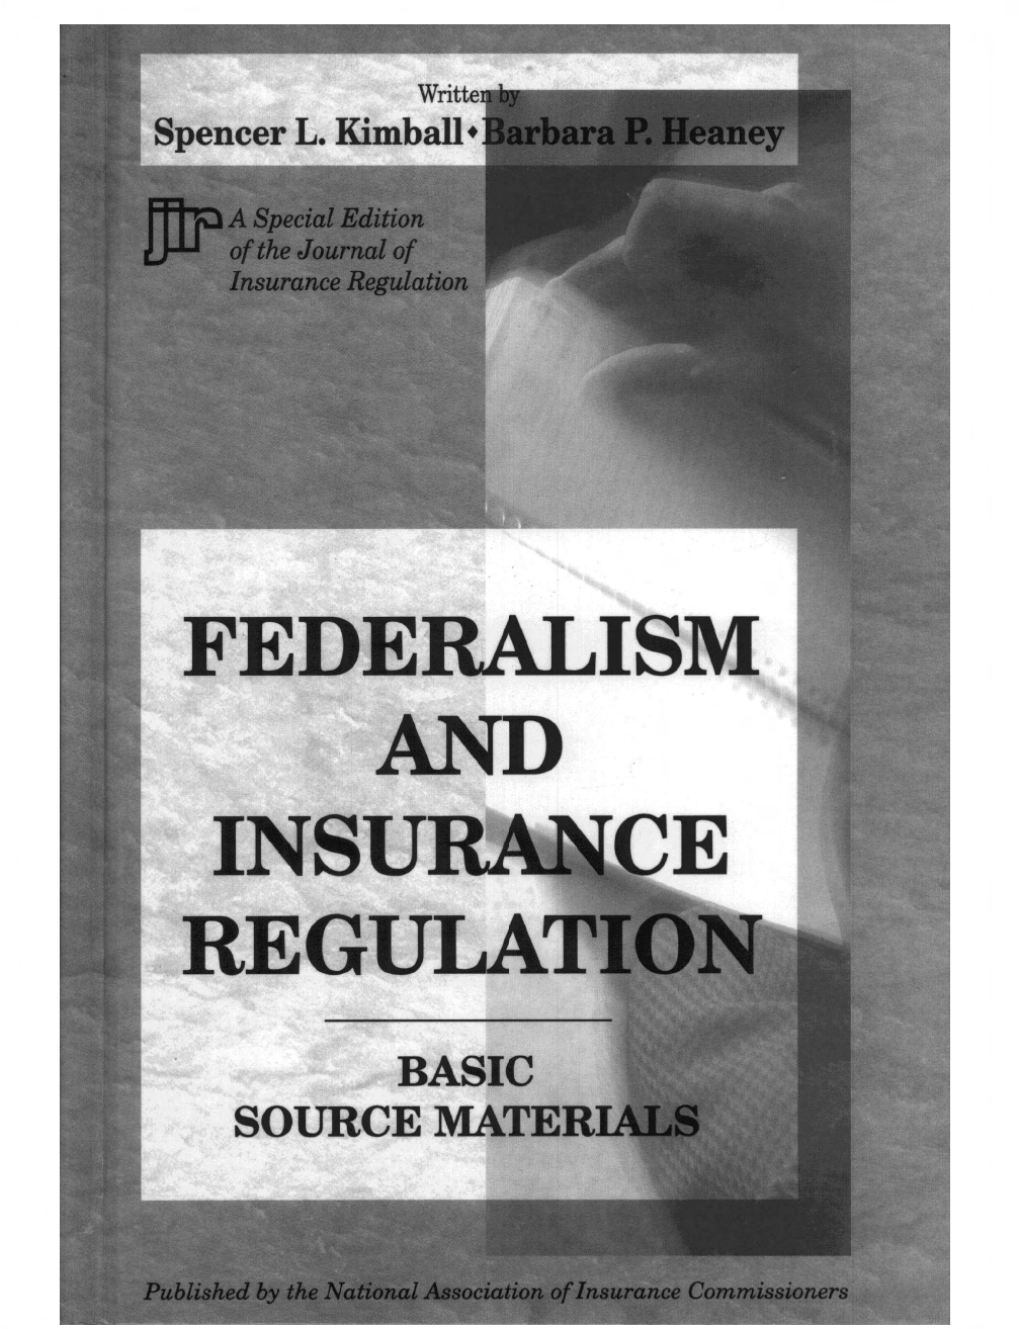 FEDERALISM and INSURANCE REGULATION BASIC SOURCE MATERIALS © Copyright NAIC 1995 All Rights Reserved